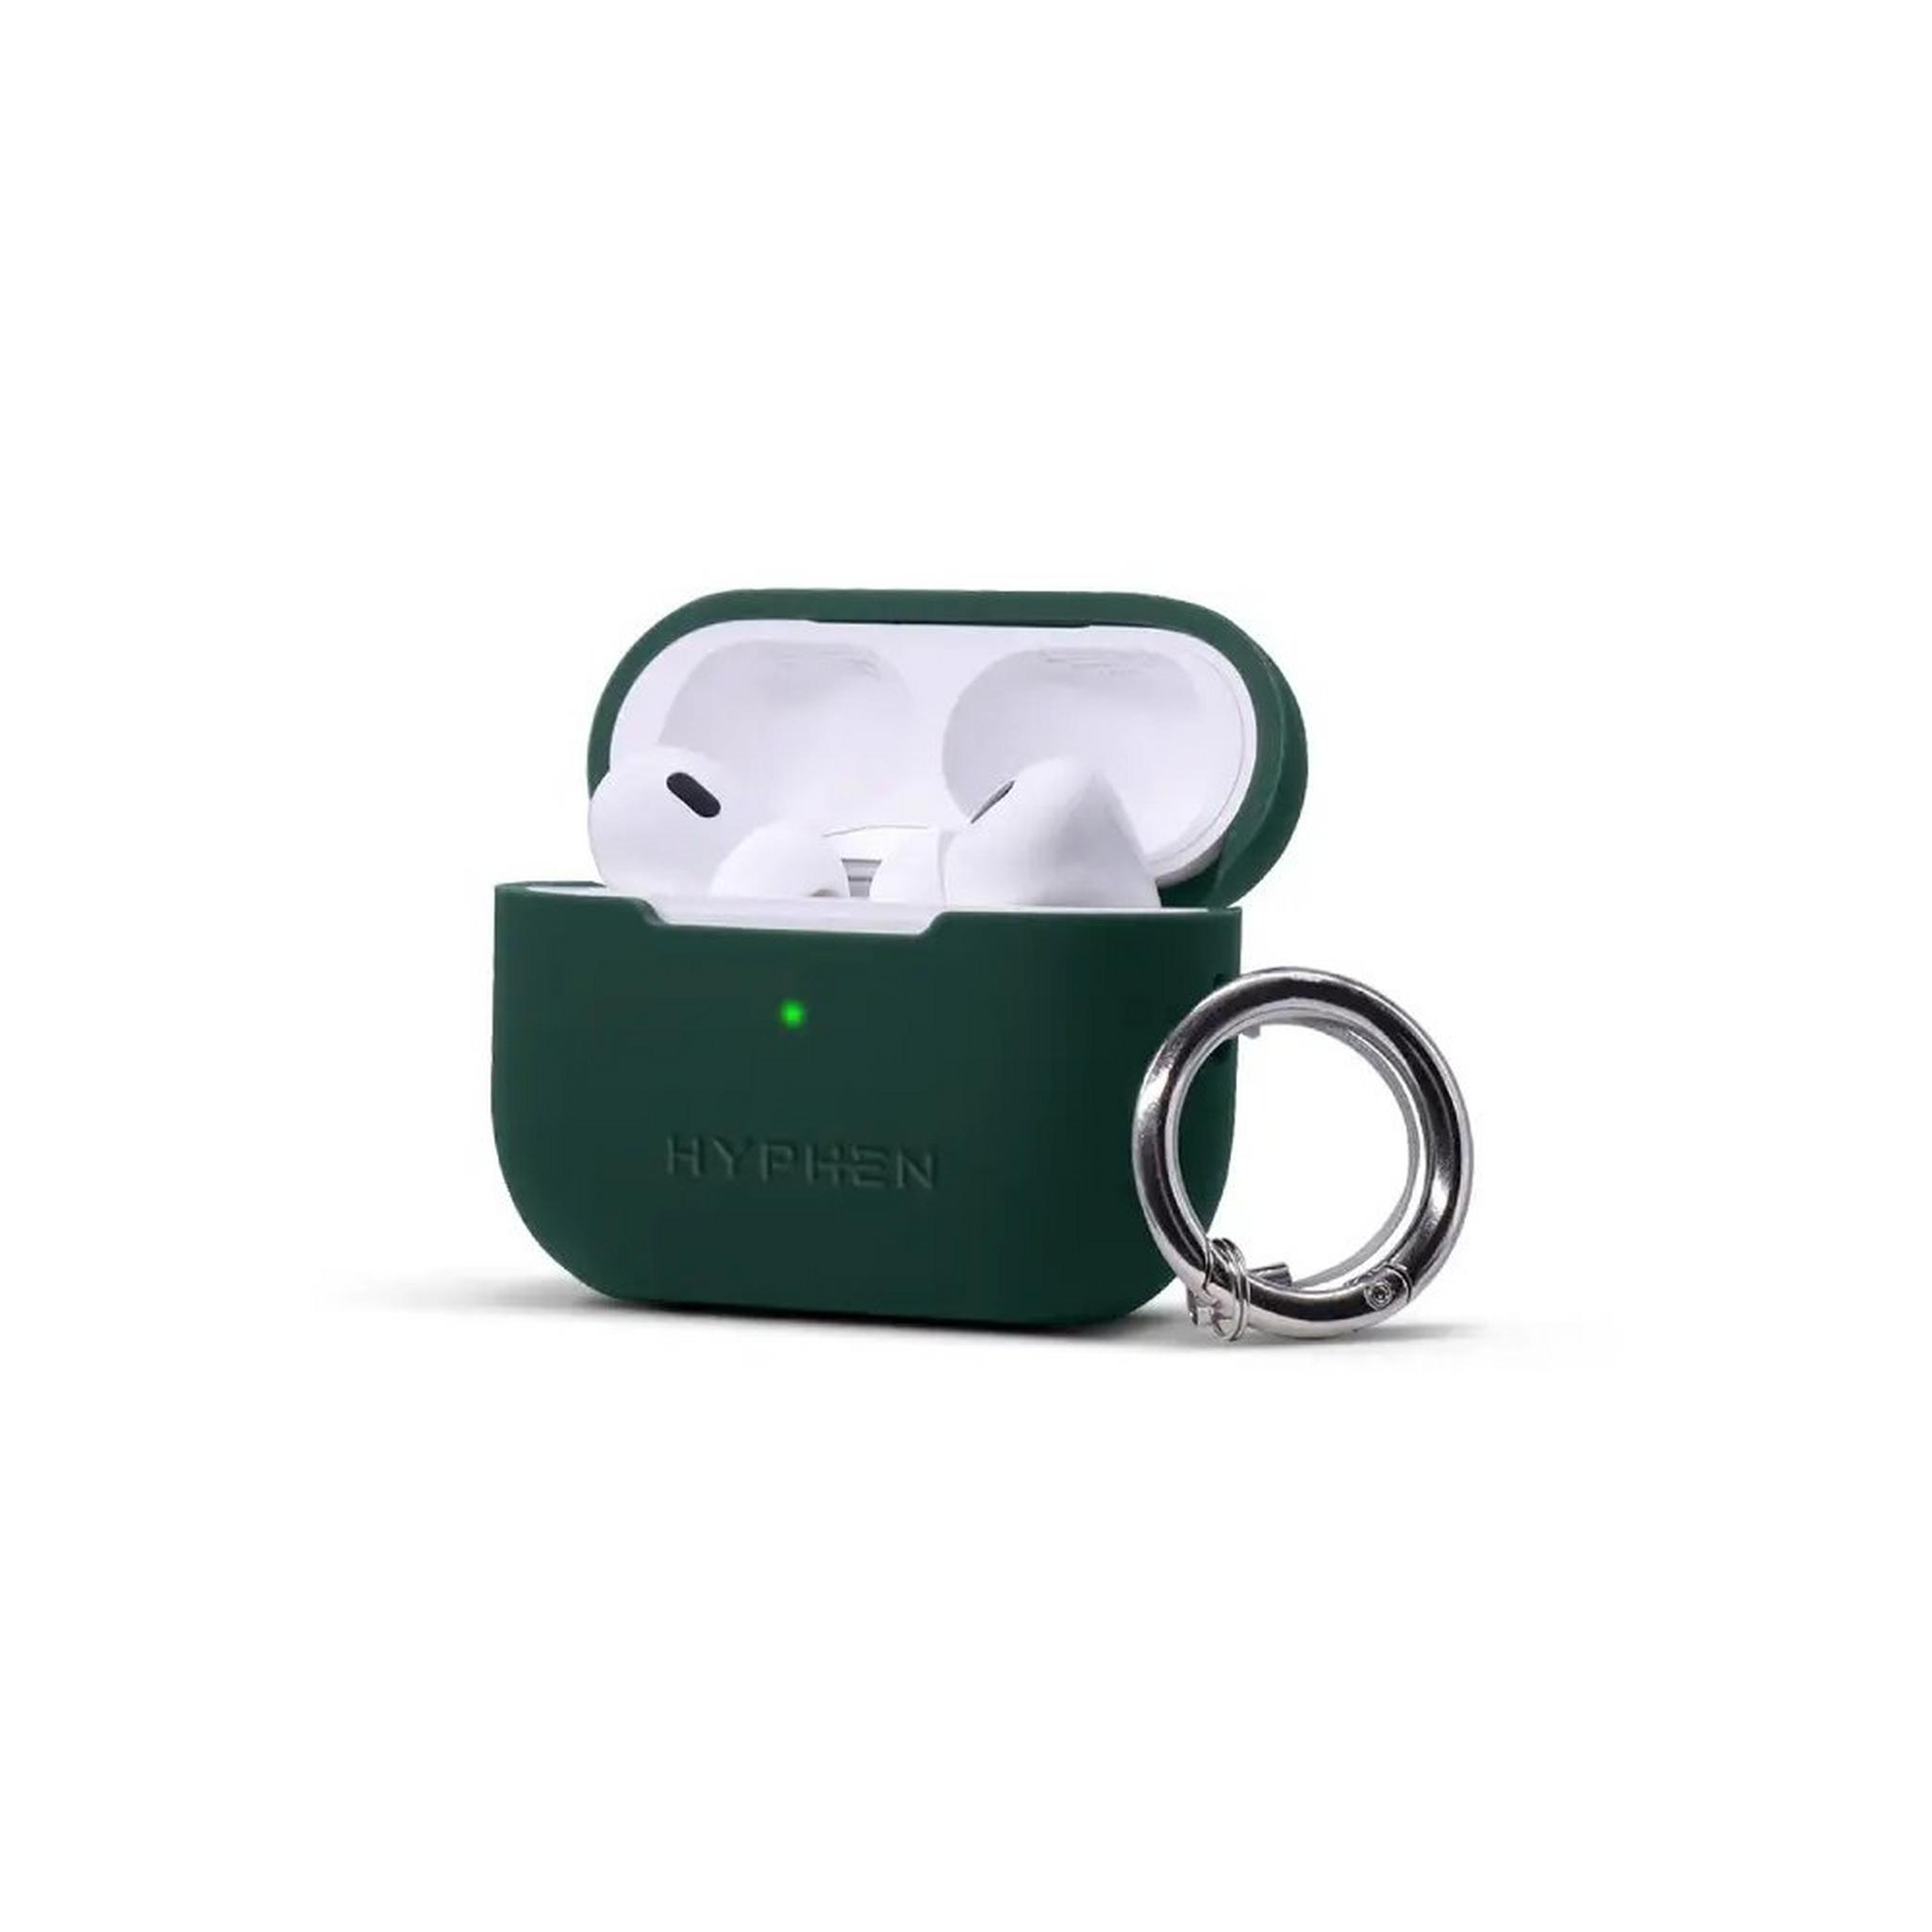 Hyphen Silicone + Clear Case For Apple Airpods Pro 2nd Gen, HAC-SCP2GR6890 - Green